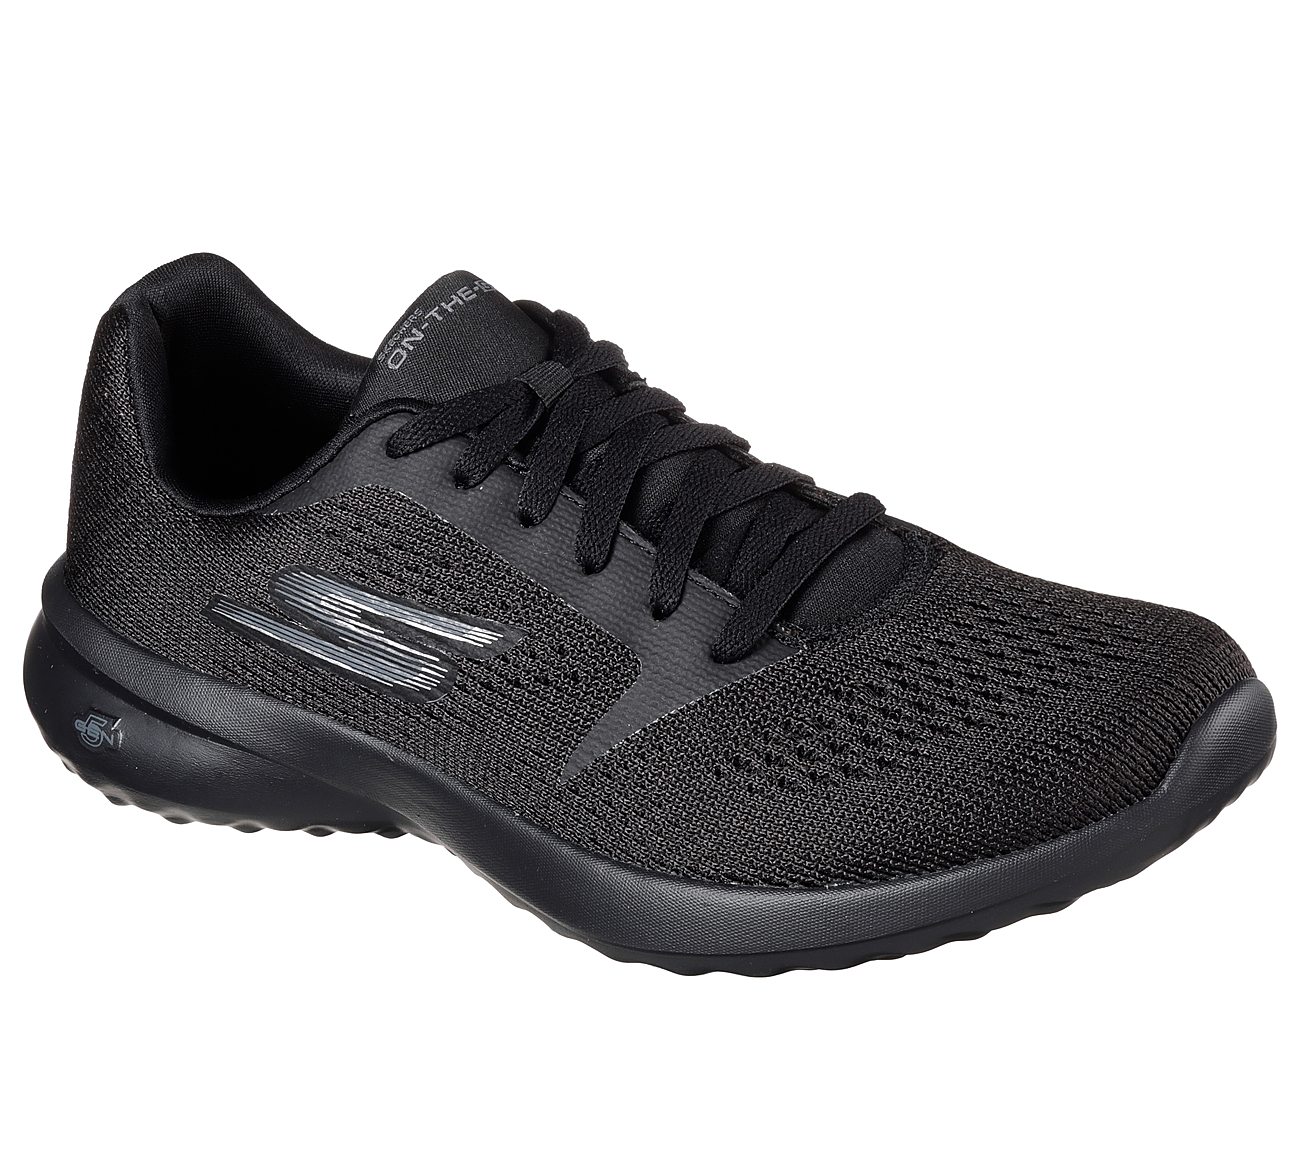 skechers on the go city 3.0 reviews